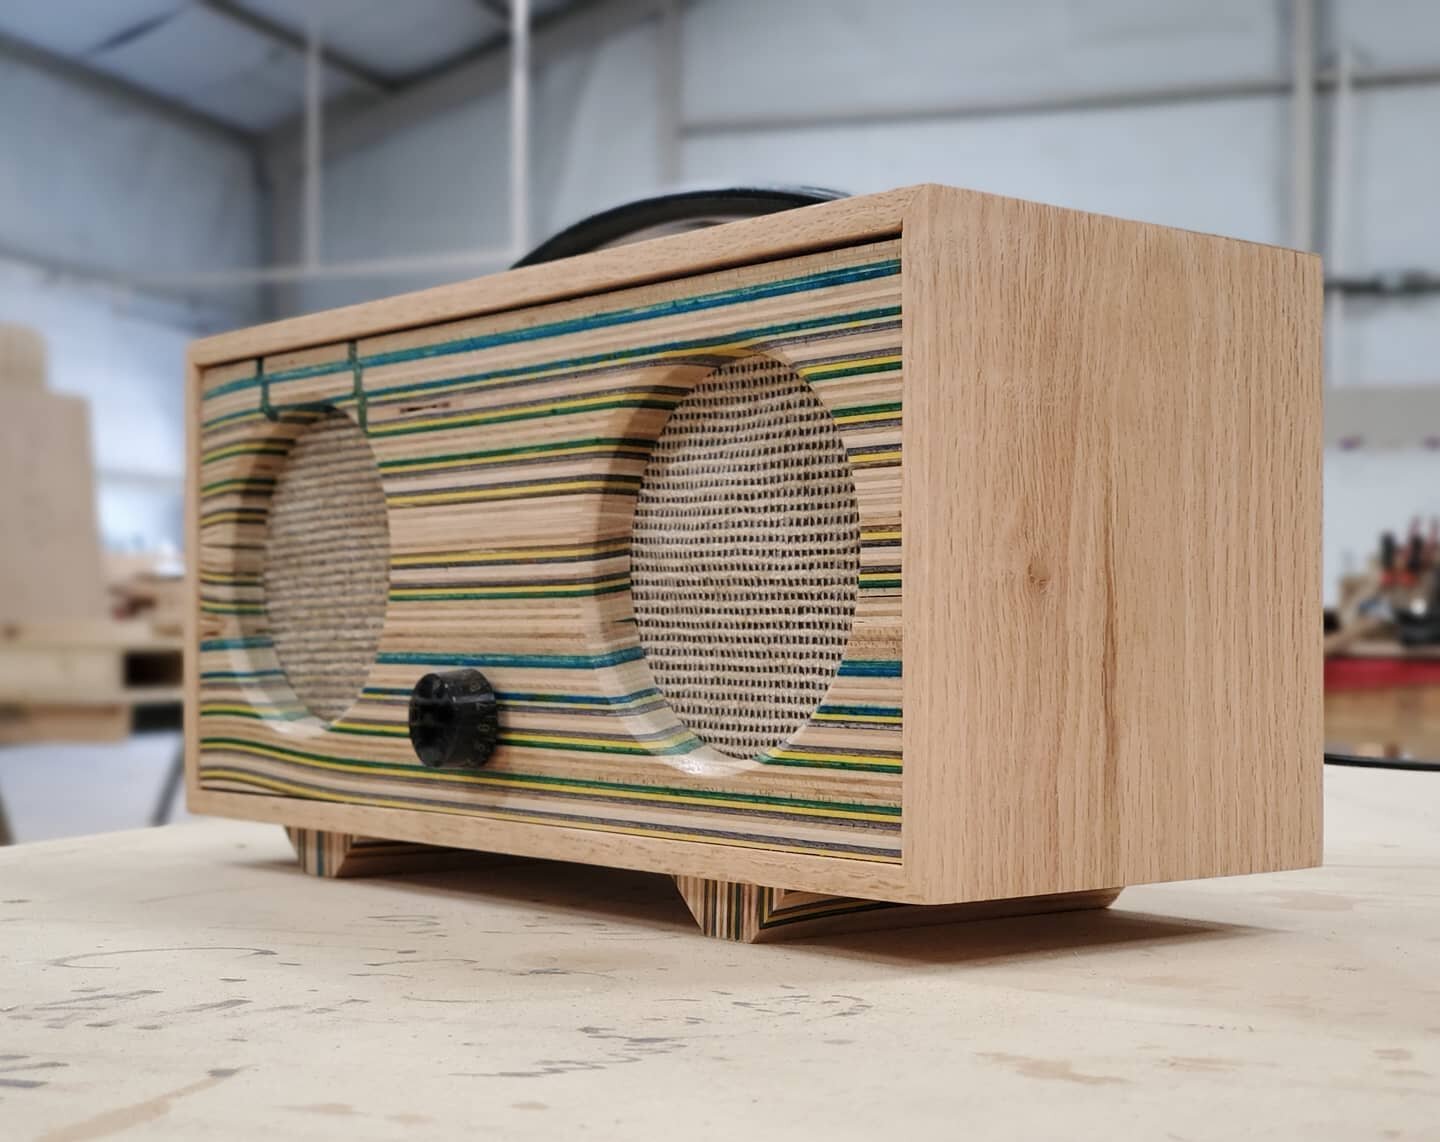 Another fun speaker build completed. The body of this beauty is made from curly redwood (which I didn't even know existed) with a laminated skateboard face that just looks awesome. #tinkeraudio #custom #bluetooth #speaker #handmade #wood #unique #one